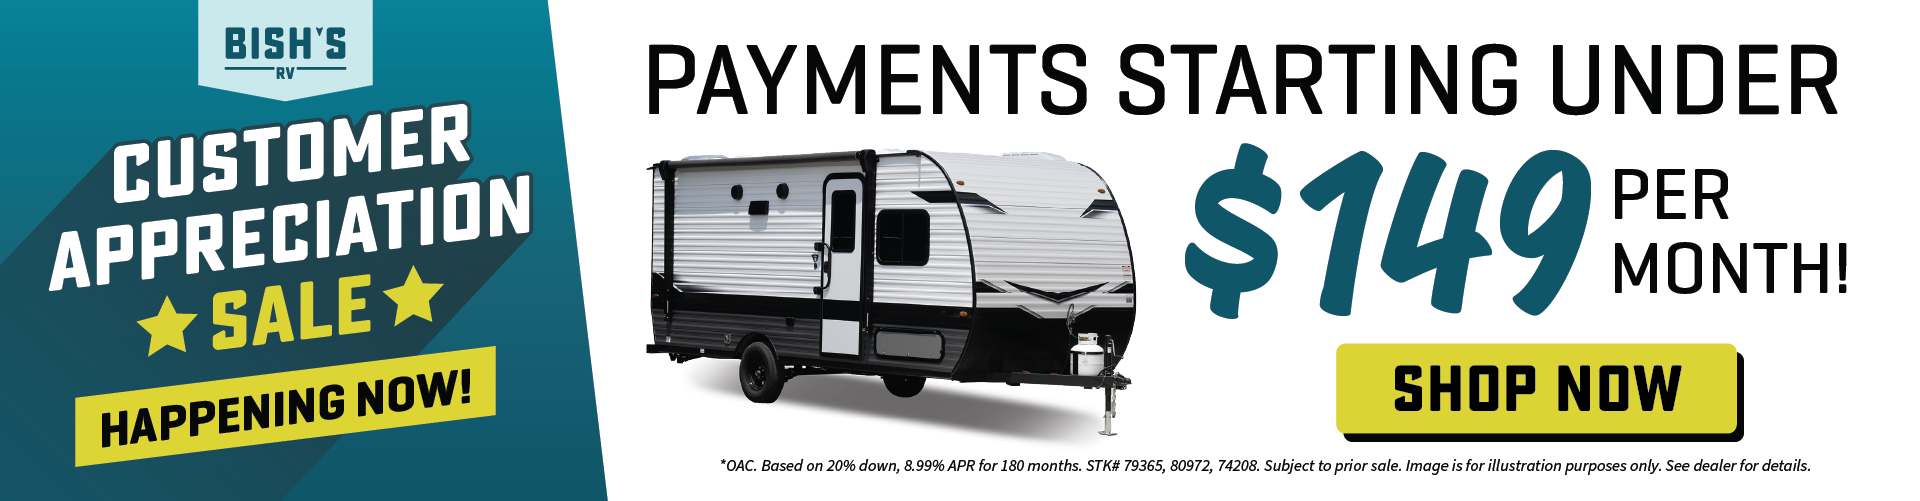 Payments starting under $149 per month OAC - Customer Appreciation Sale - Happening Now! - Bish's RV